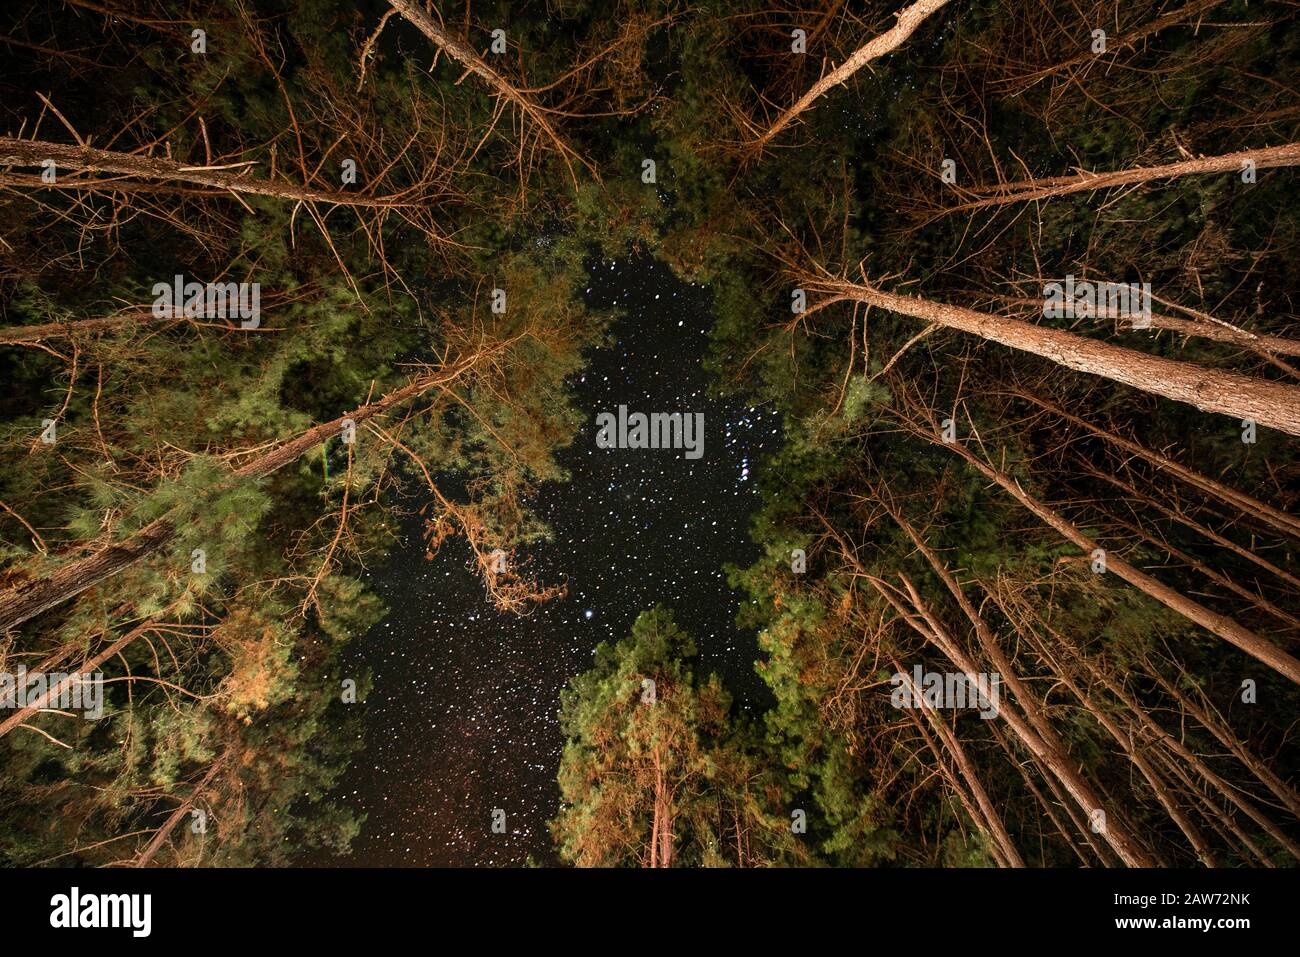 The bottom view on the star sky in the wood at night. Stock Photo